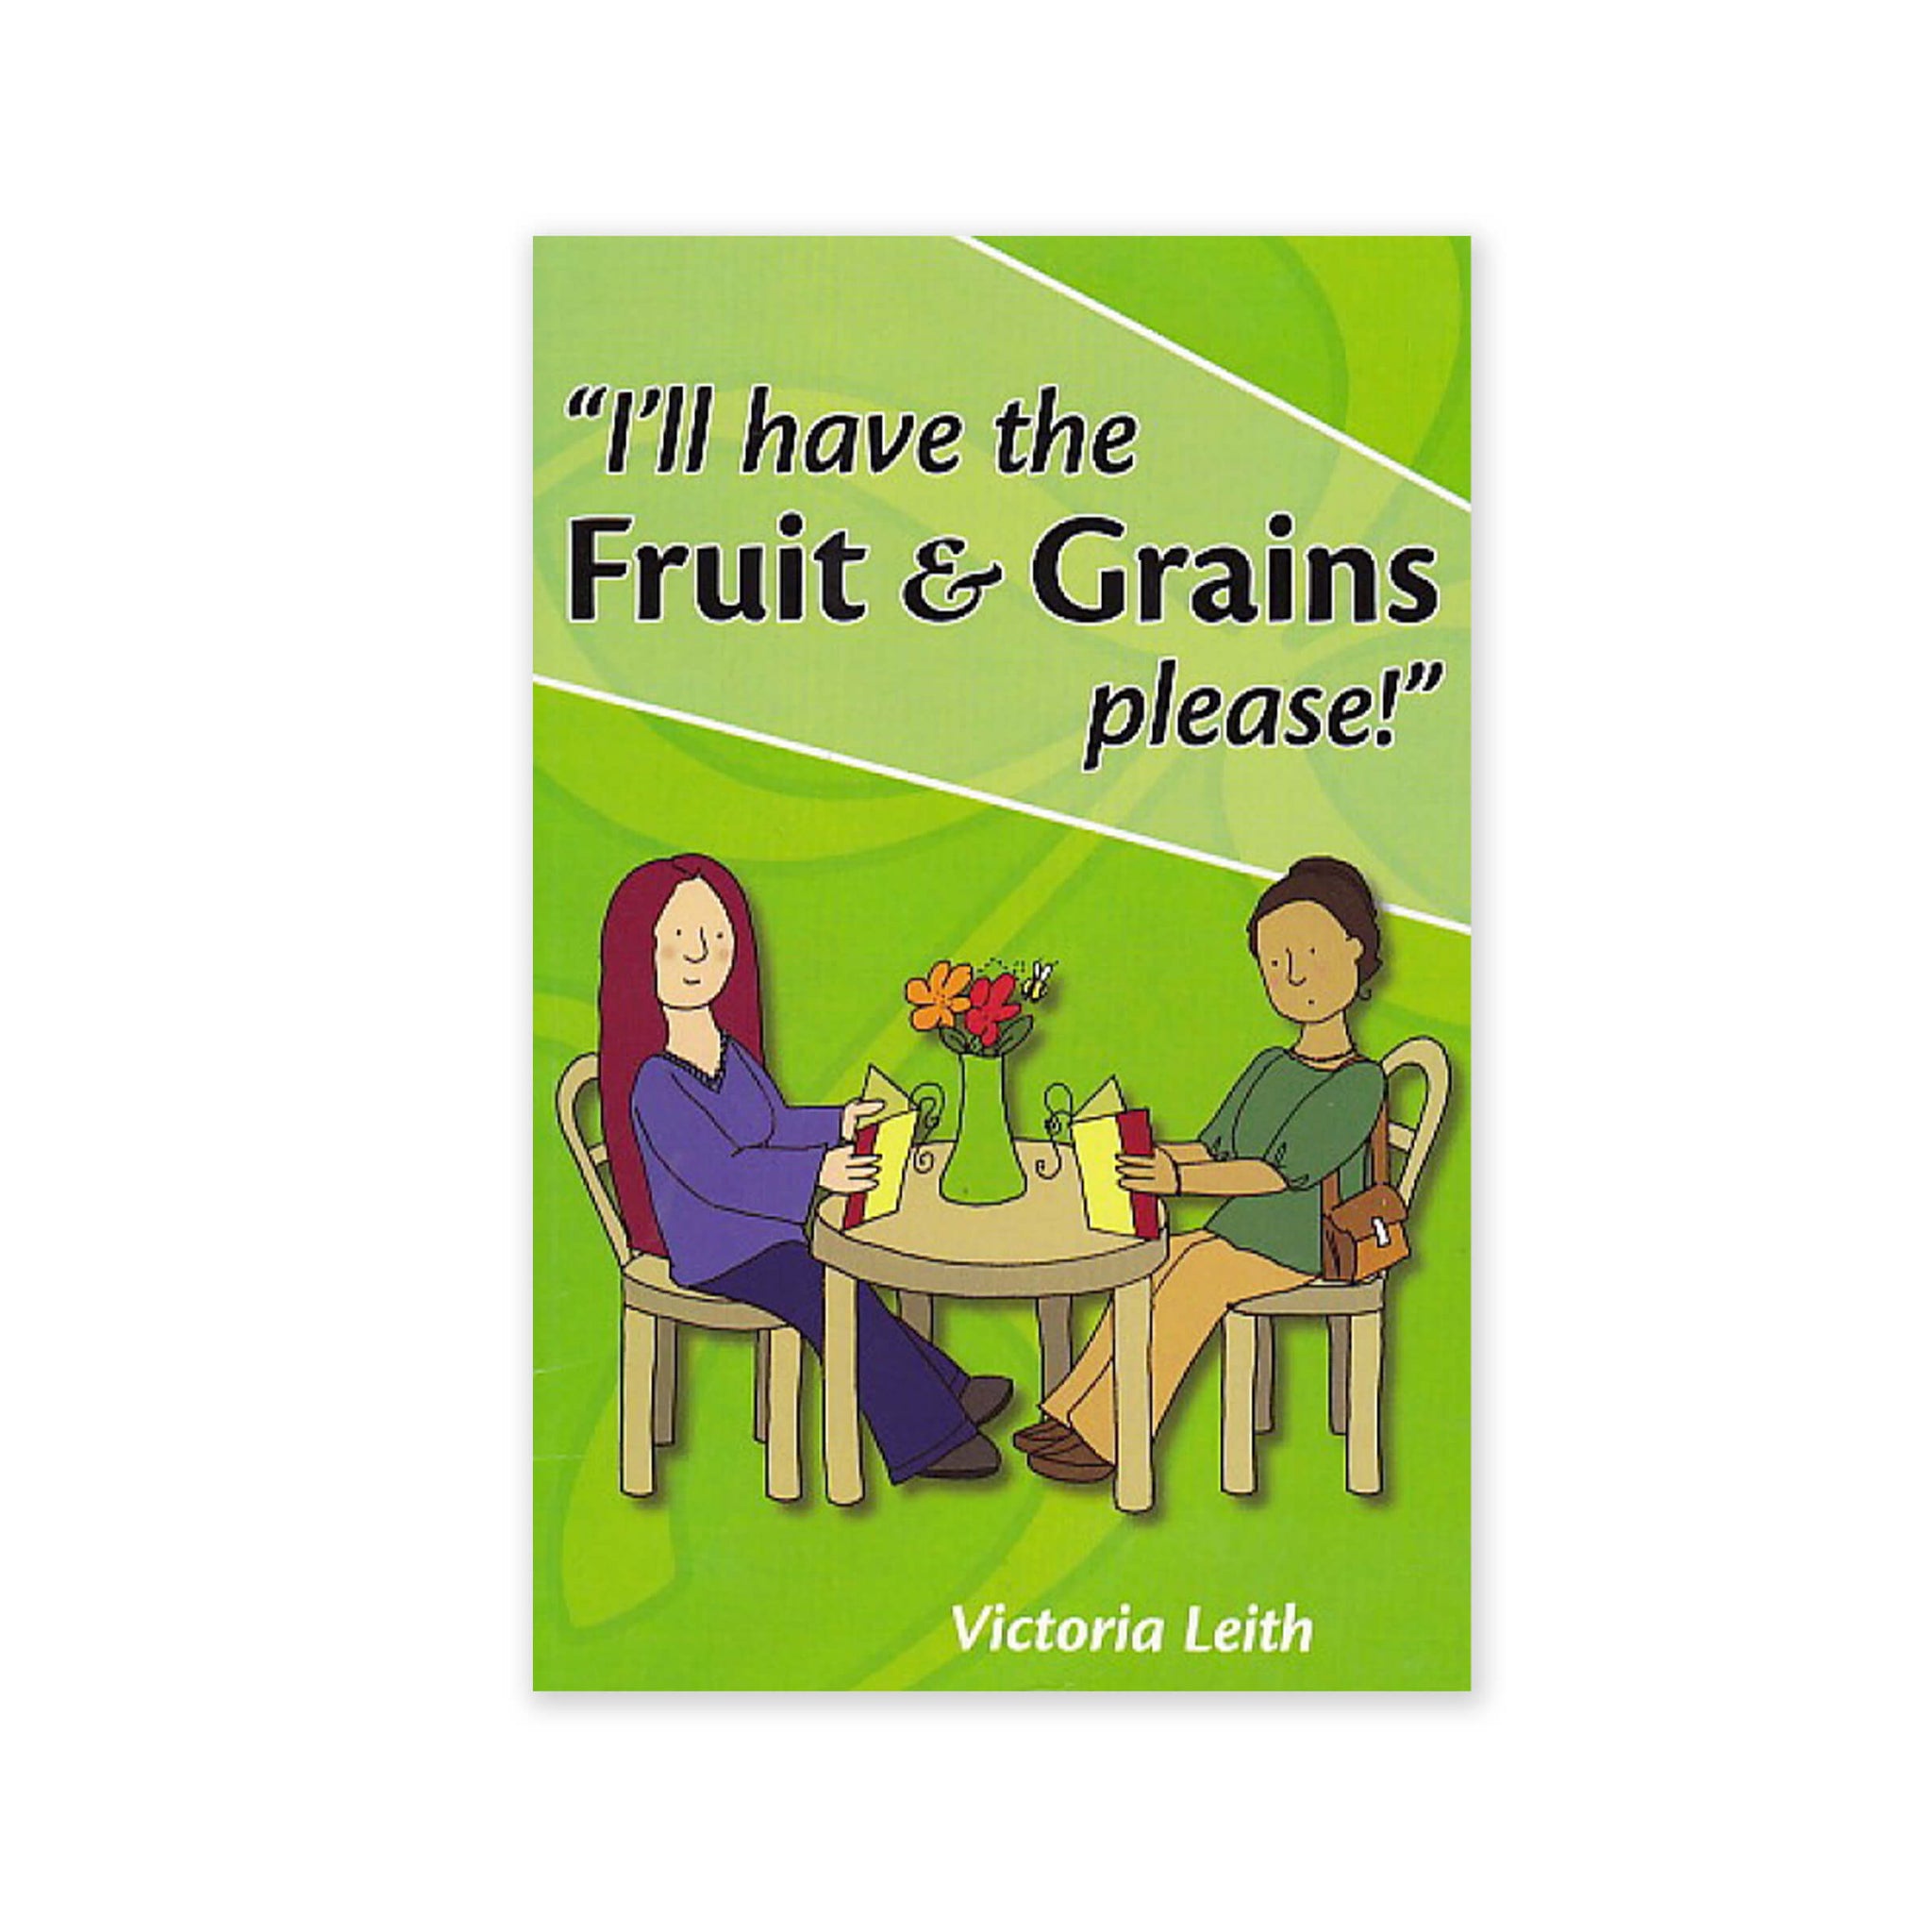 I'll have the fruit and grains, please! - Making Inspired Food Choices